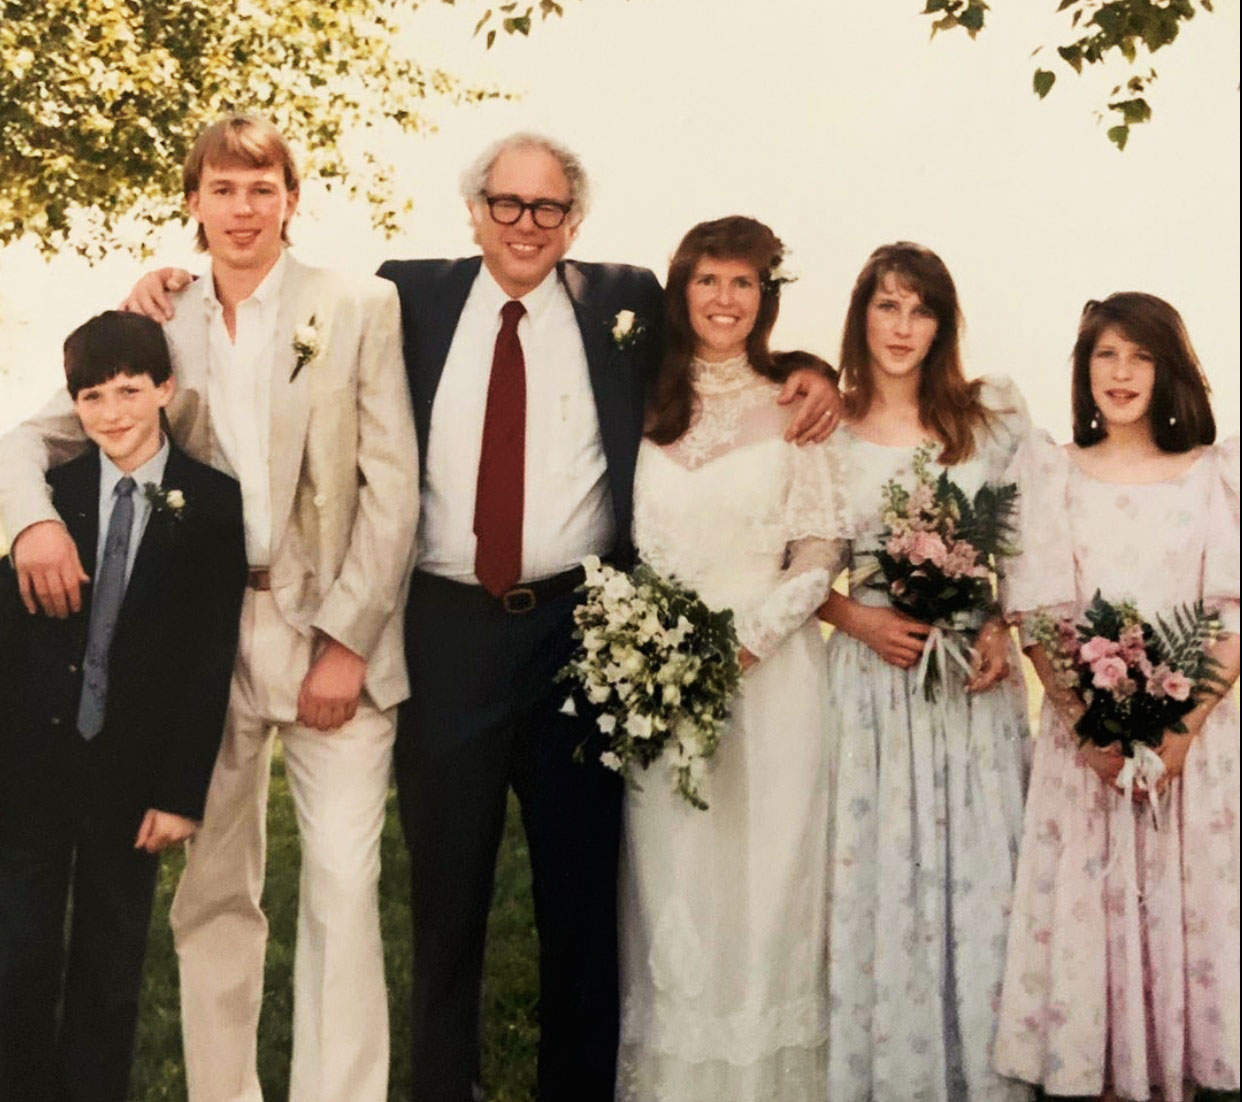 Sanders with Jane and their newly blended family in 1988 (Courtesy Senator Bernie Sanders)